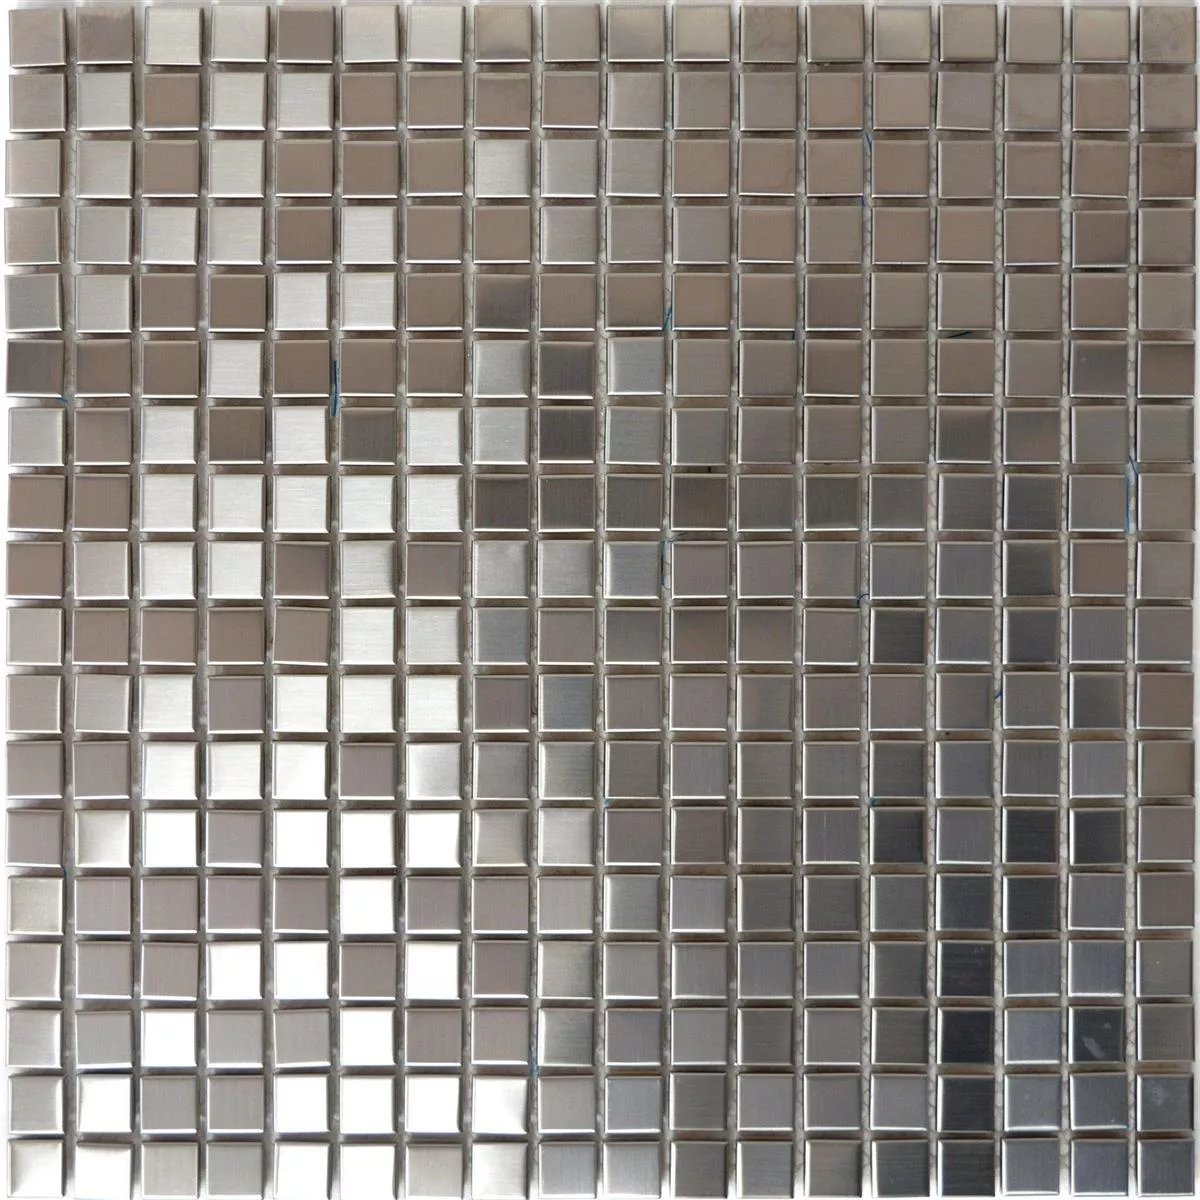 Stainless Steel Mosaic Tiles Brushed Square 15